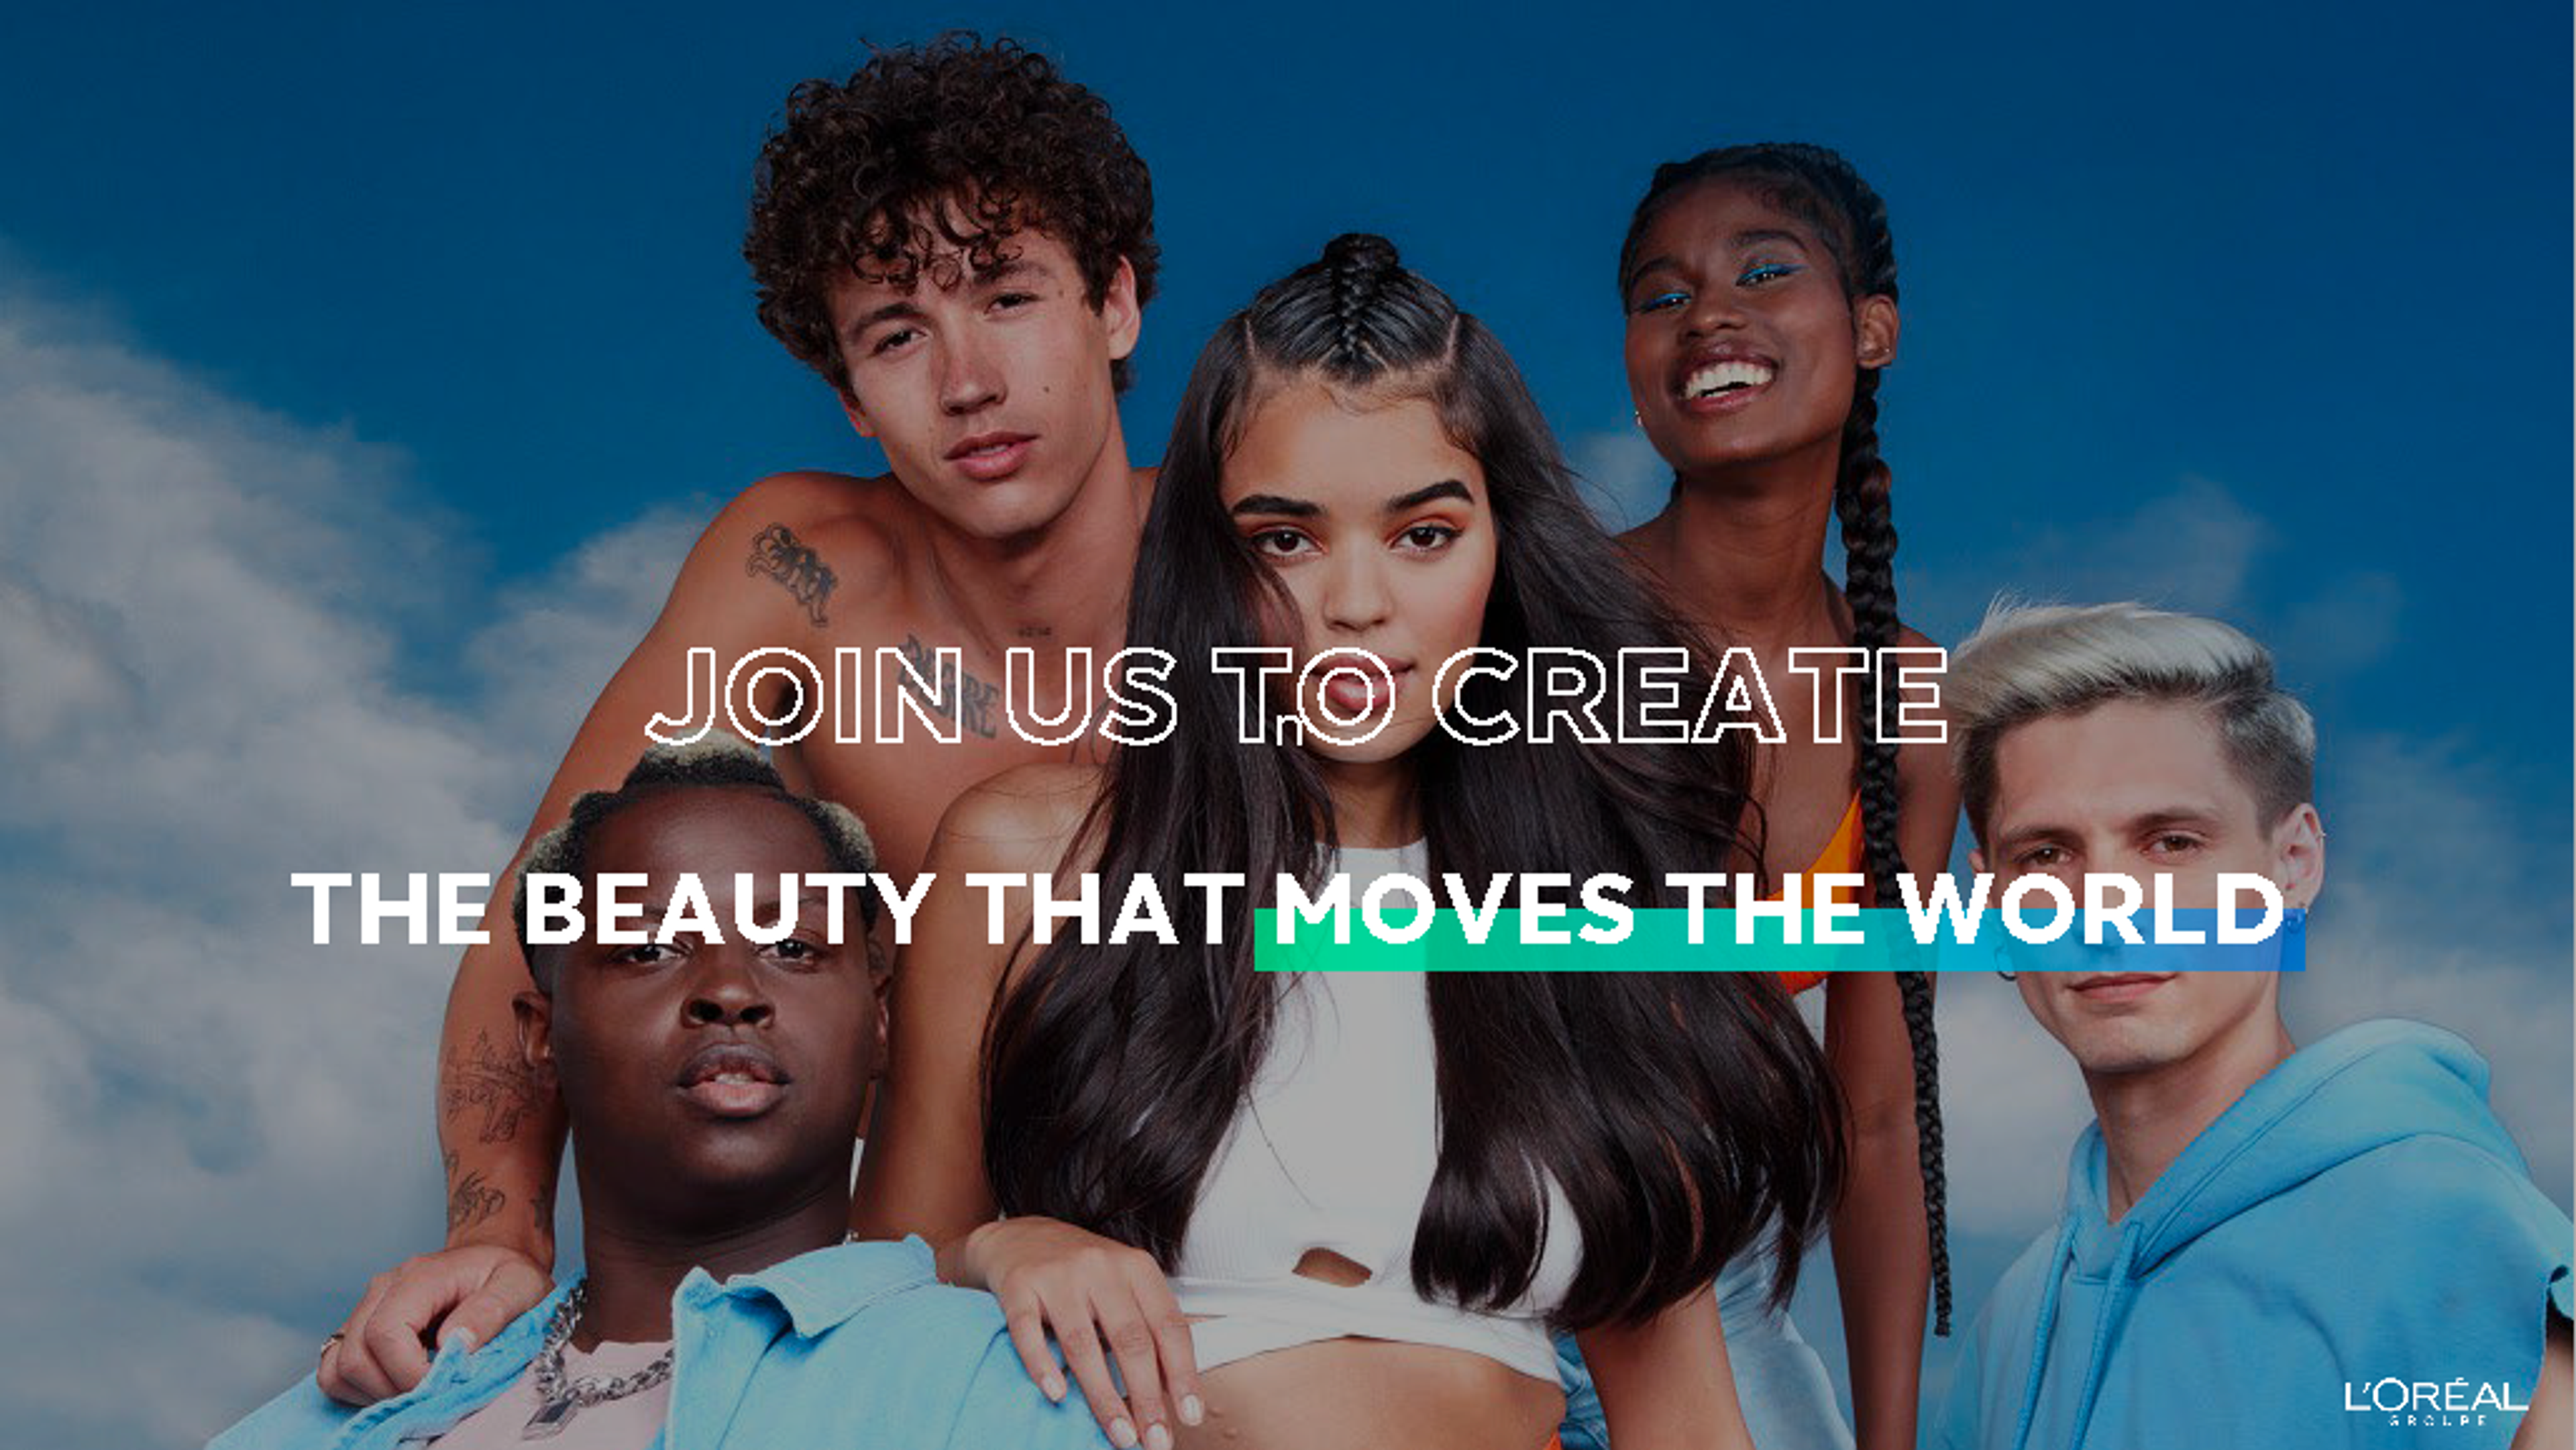 Group of young people with text reading "Join us to create the beauty that moves the world"